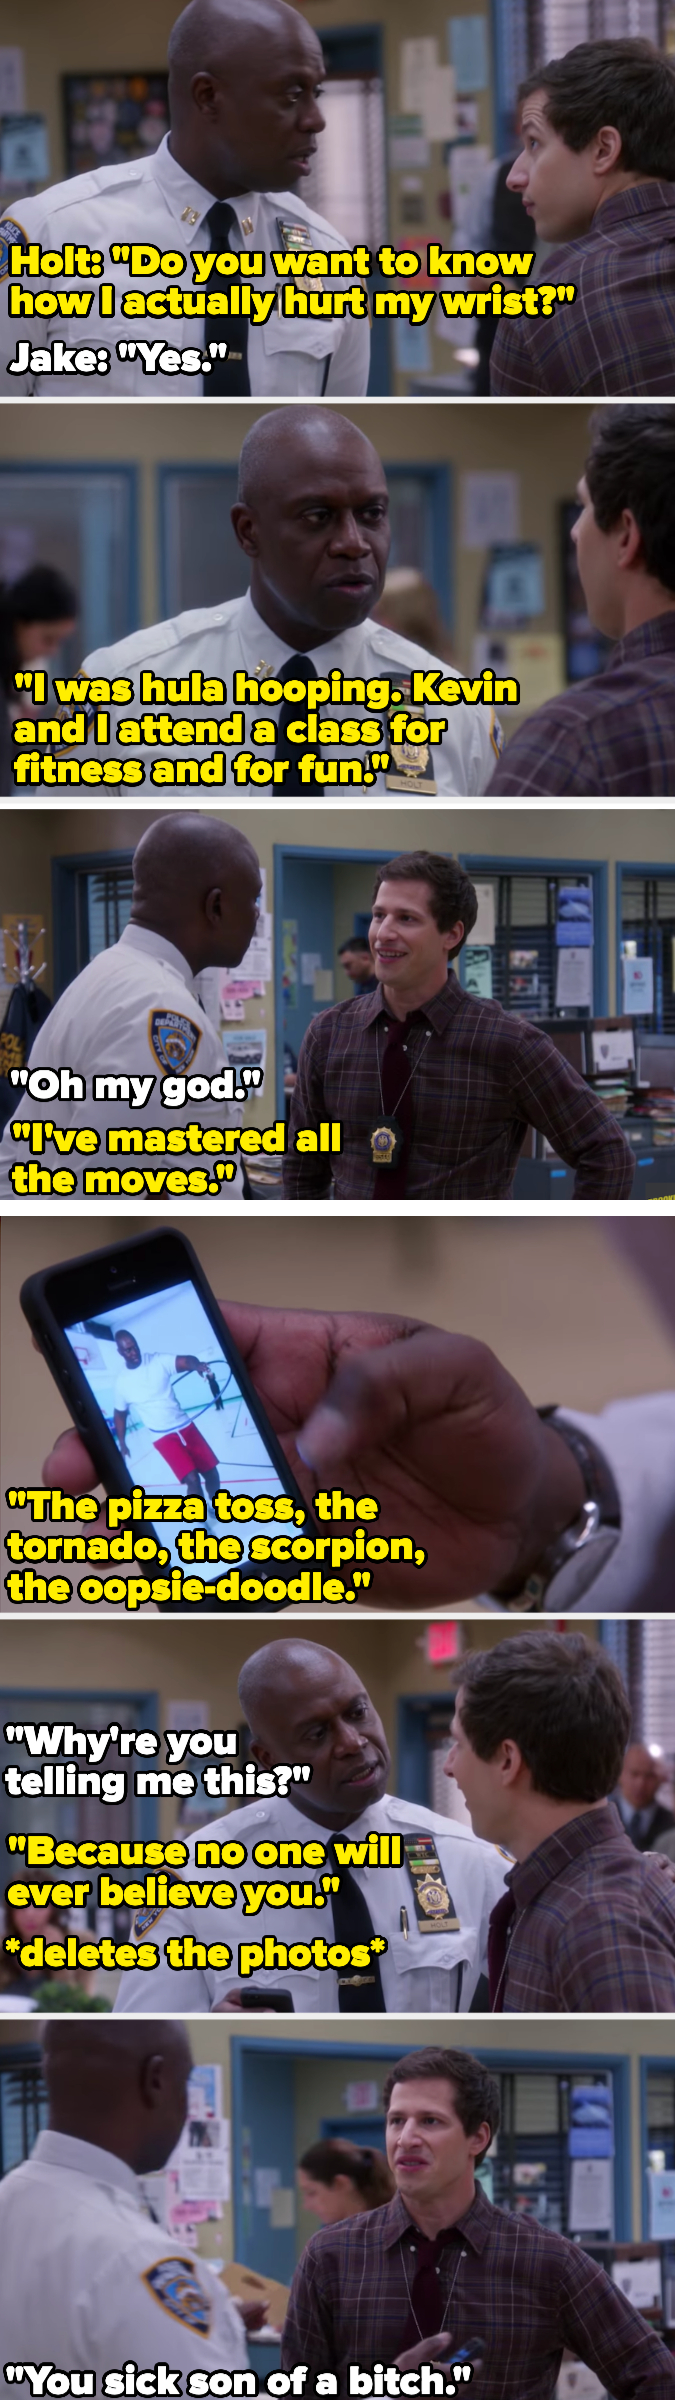 Holt shows Peralta pictures of him hula hooping, then deletes it